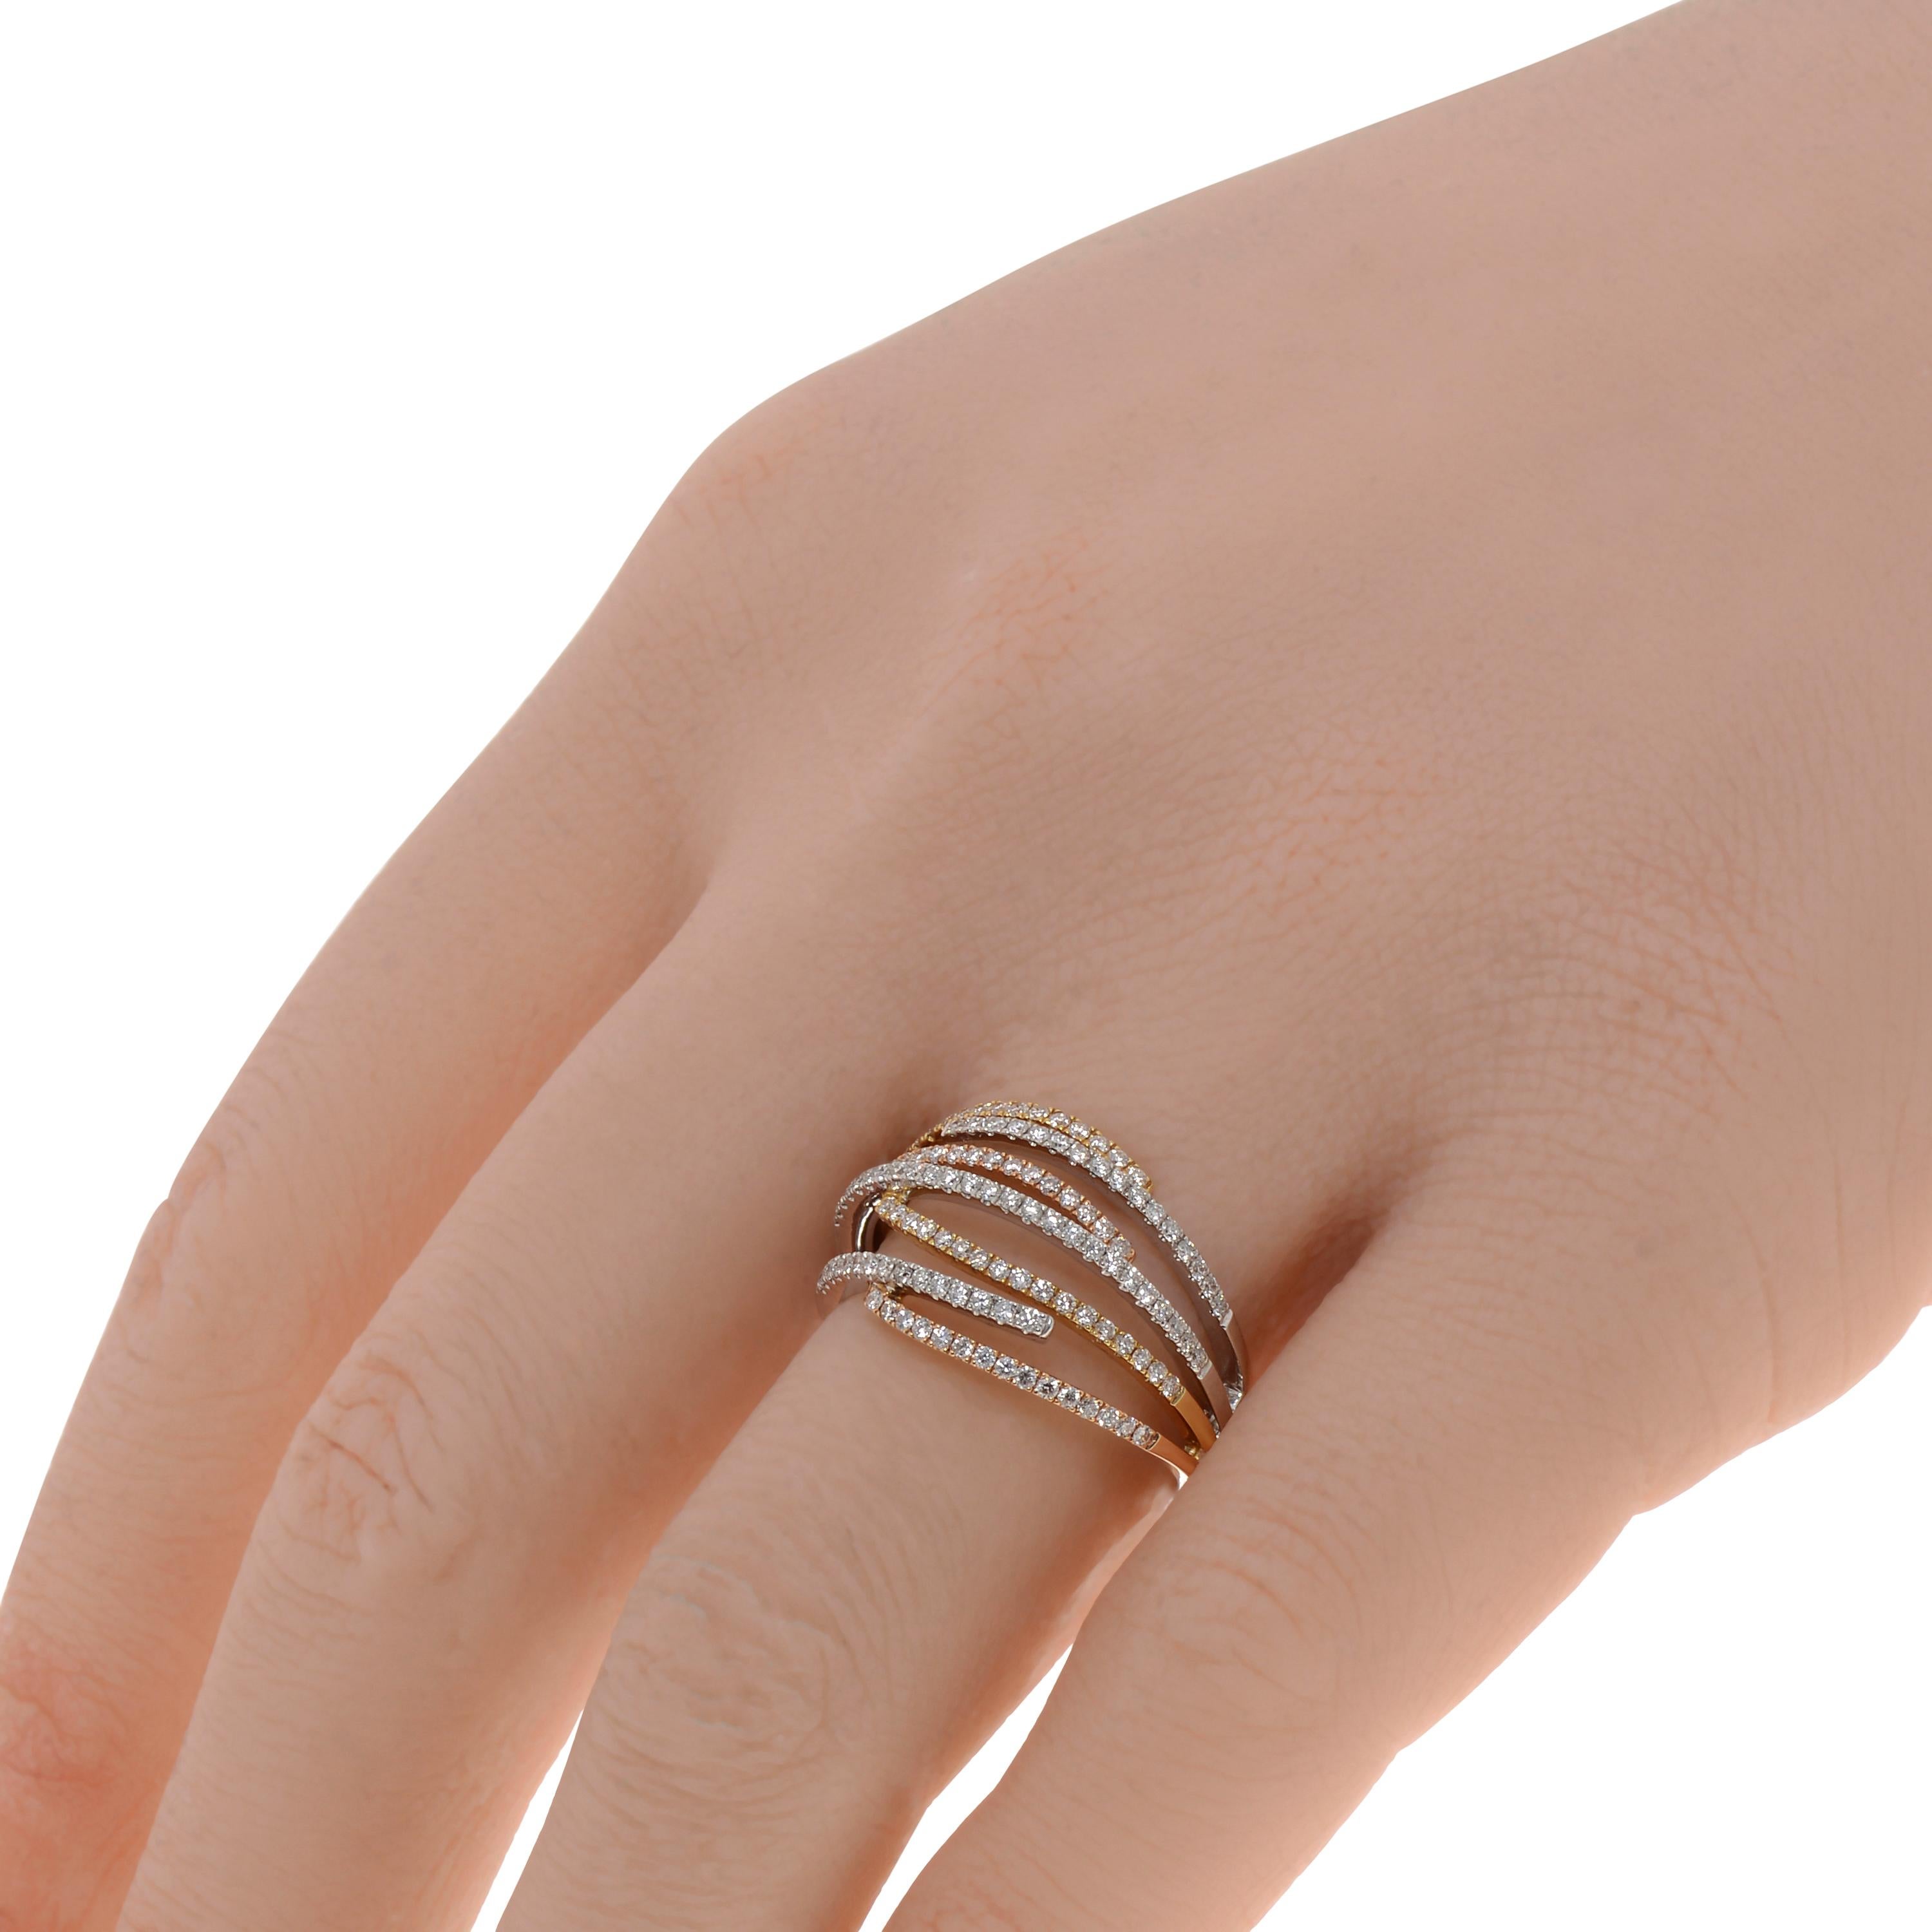 This brilliant Piero Milano 18K White Gold and 18k Rose Gold and 18k Yellow Gold Highway Ring features a tri color design crafted from rows of glittering diamonds 0.6ct. tw. set in Yellow, White, and Rose Gold. The ring size is 6.75 (53.8). The